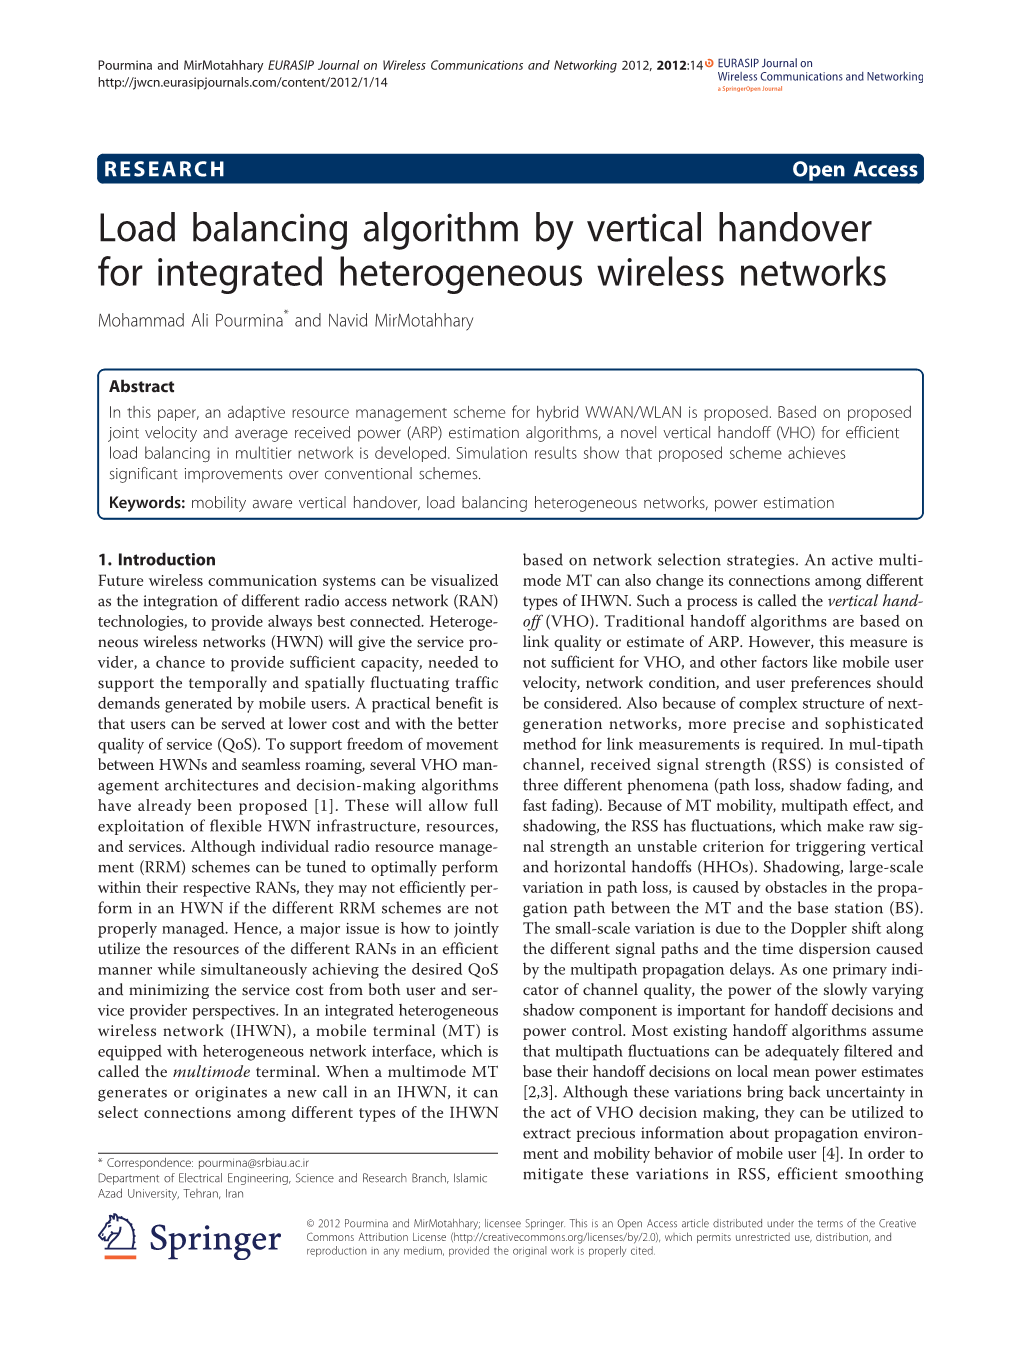 Load Balancing Algorithm by Vertical Handover for Integrated Heterogeneous Wireless Networks Mohammad Ali Pourmina* and Navid Mirmotahhary